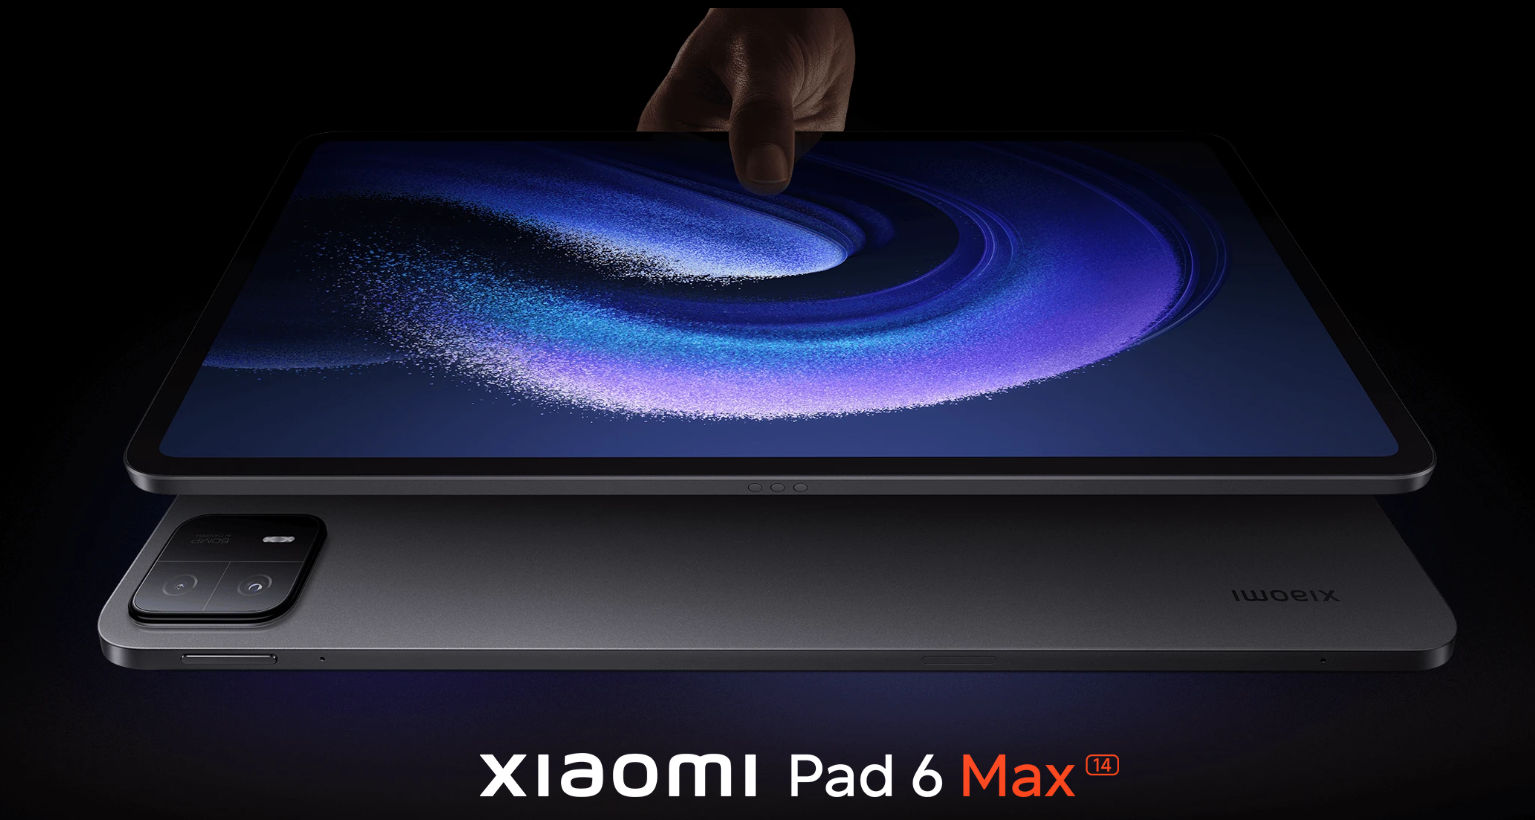 Xiaomi Pad 6 Max enters the big tablet fray with 14-inch display